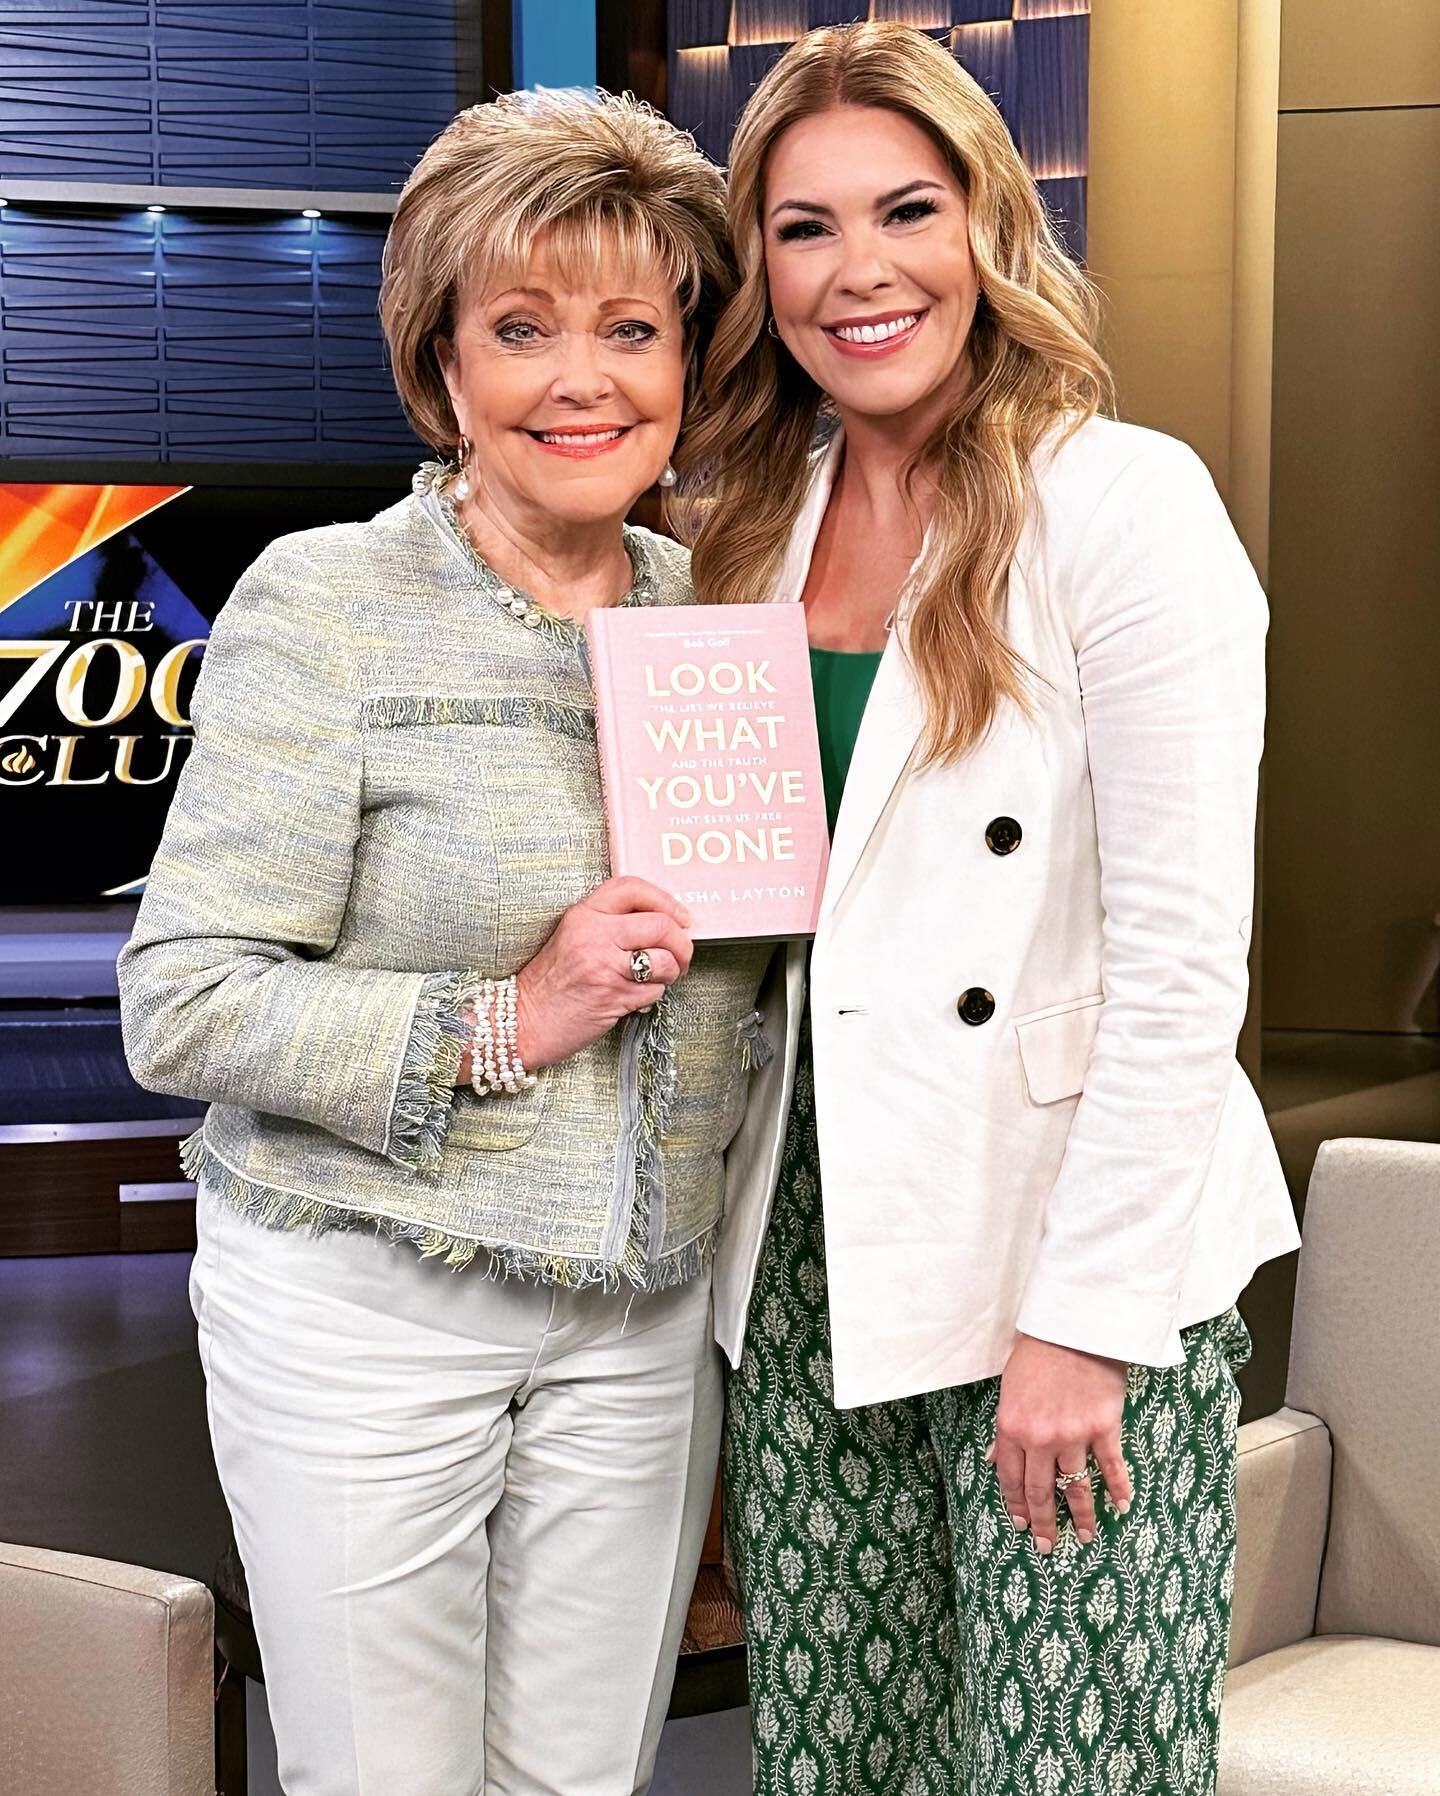 So sweet being with @meeuwsenterry on @the700club 
Thank you for supporting my new book &ldquo;Look What You&rsquo;ve Done&rdquo; and being such a wonderful team to work with!!